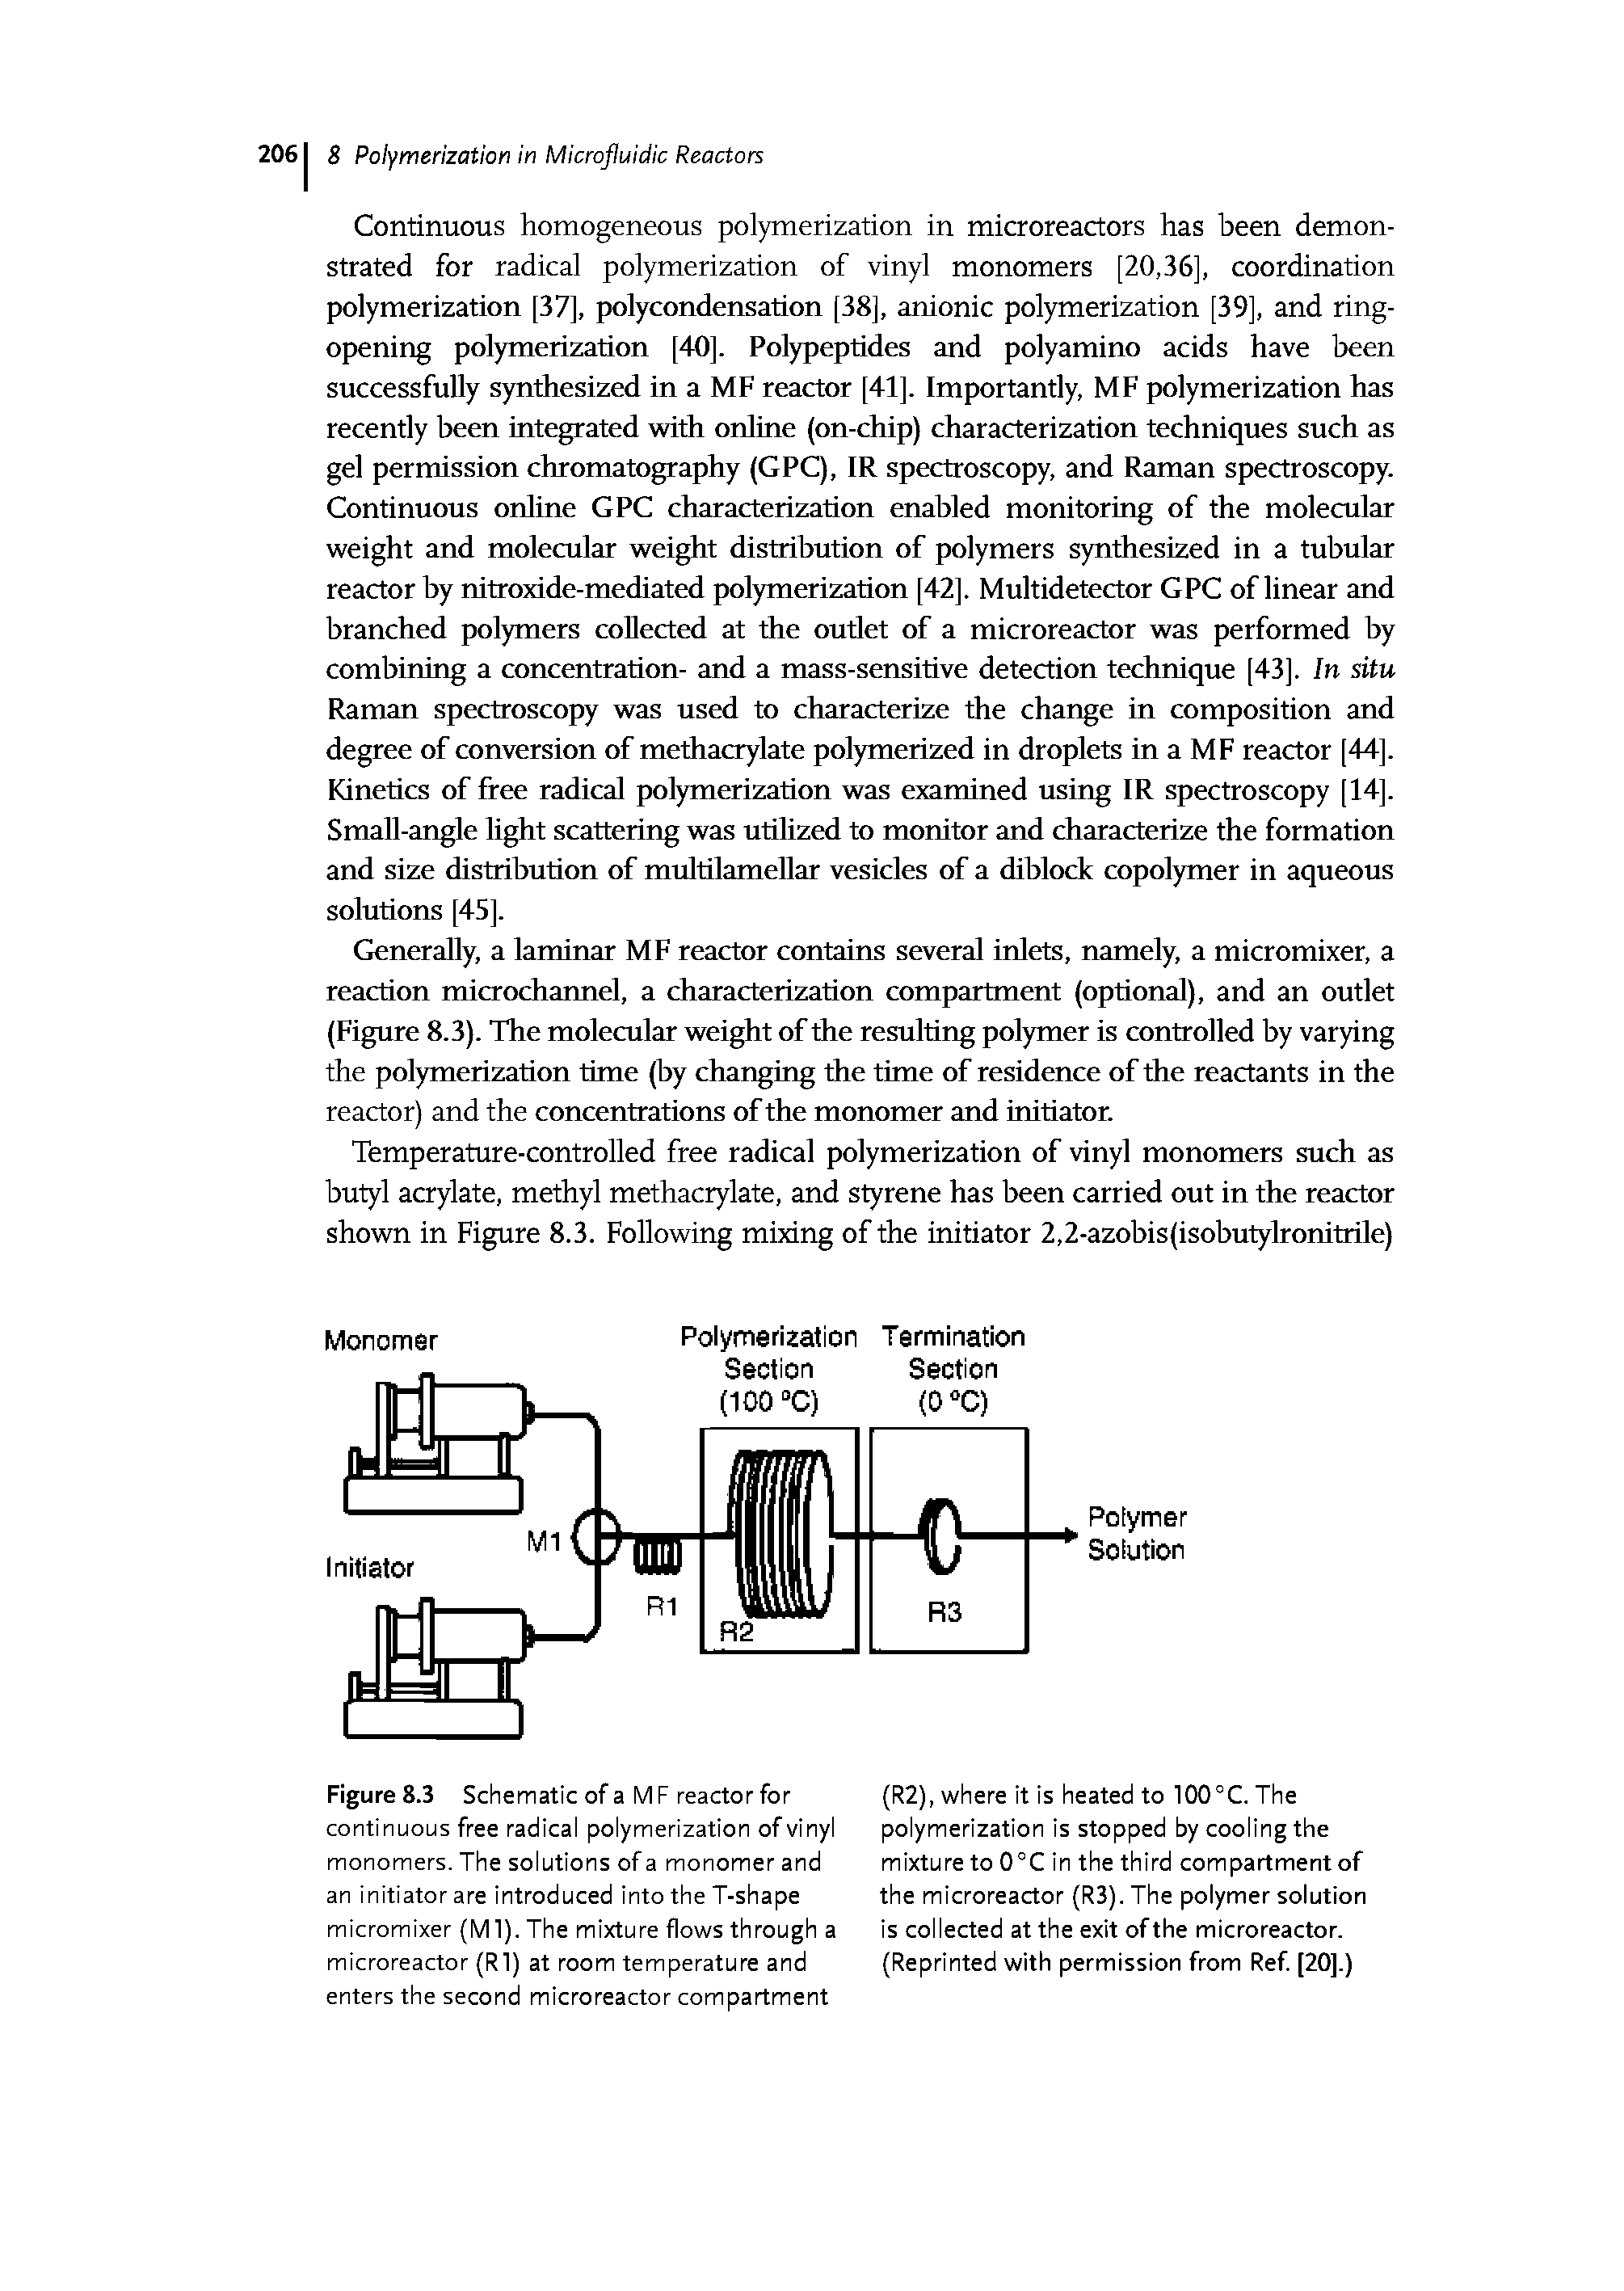 Figure 8.3 Schematic of a M F reactor for continuous free radical polymerization of vinyl monomers. The solutions of a monomer and an initiator are introduced into the T-shape micromixer (Ml). The mixture flows through a microreactor (Rl) at room temperature and enters the second microreactor compartment...